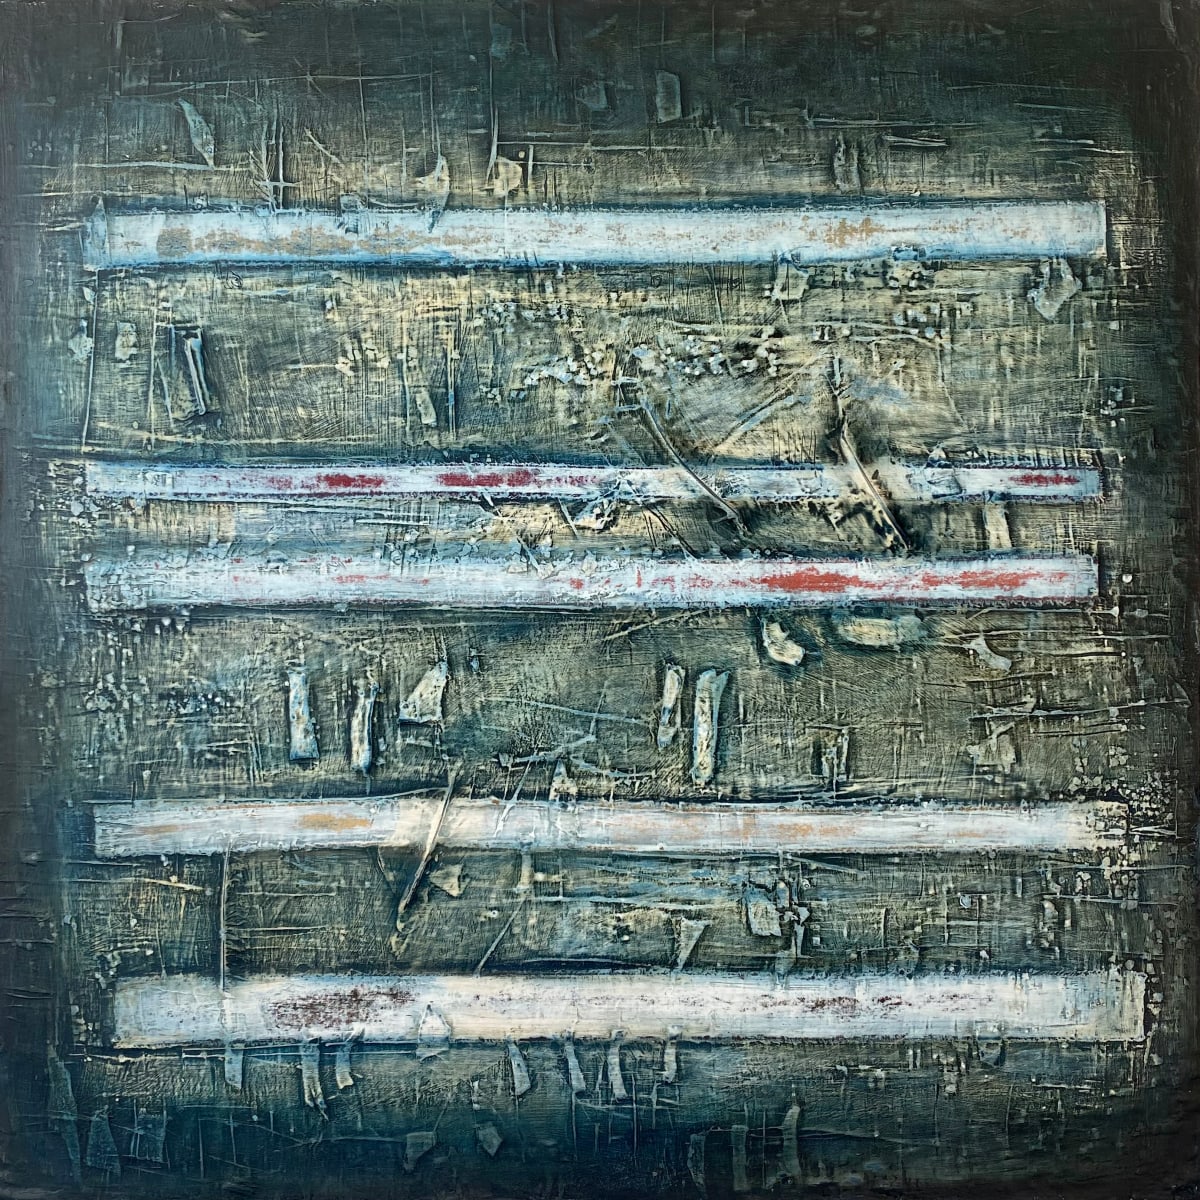 Prelude #7 by John Worth  Image: Large square abstract musical textured painting on canvas.